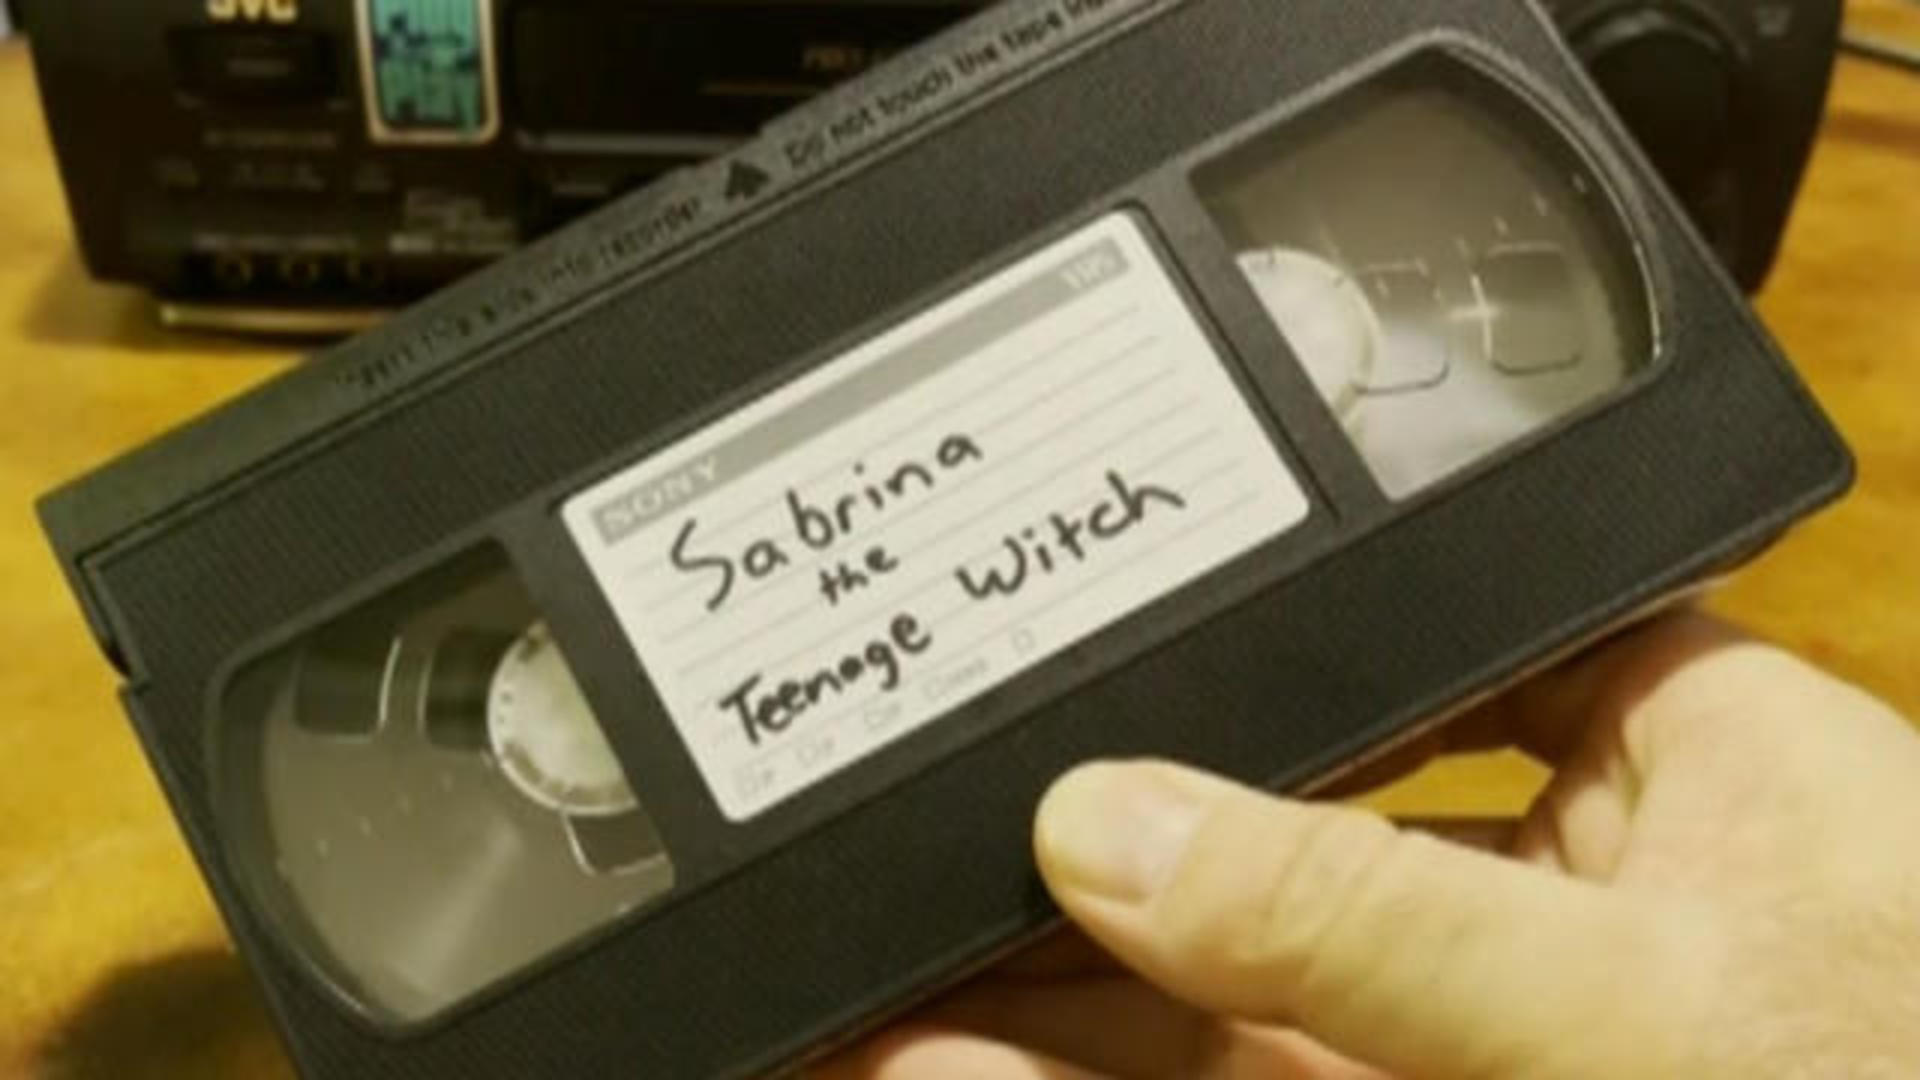 Woman Faced Felony Charge For Not Returning Vhs Tape Over Years Ago Cbs News